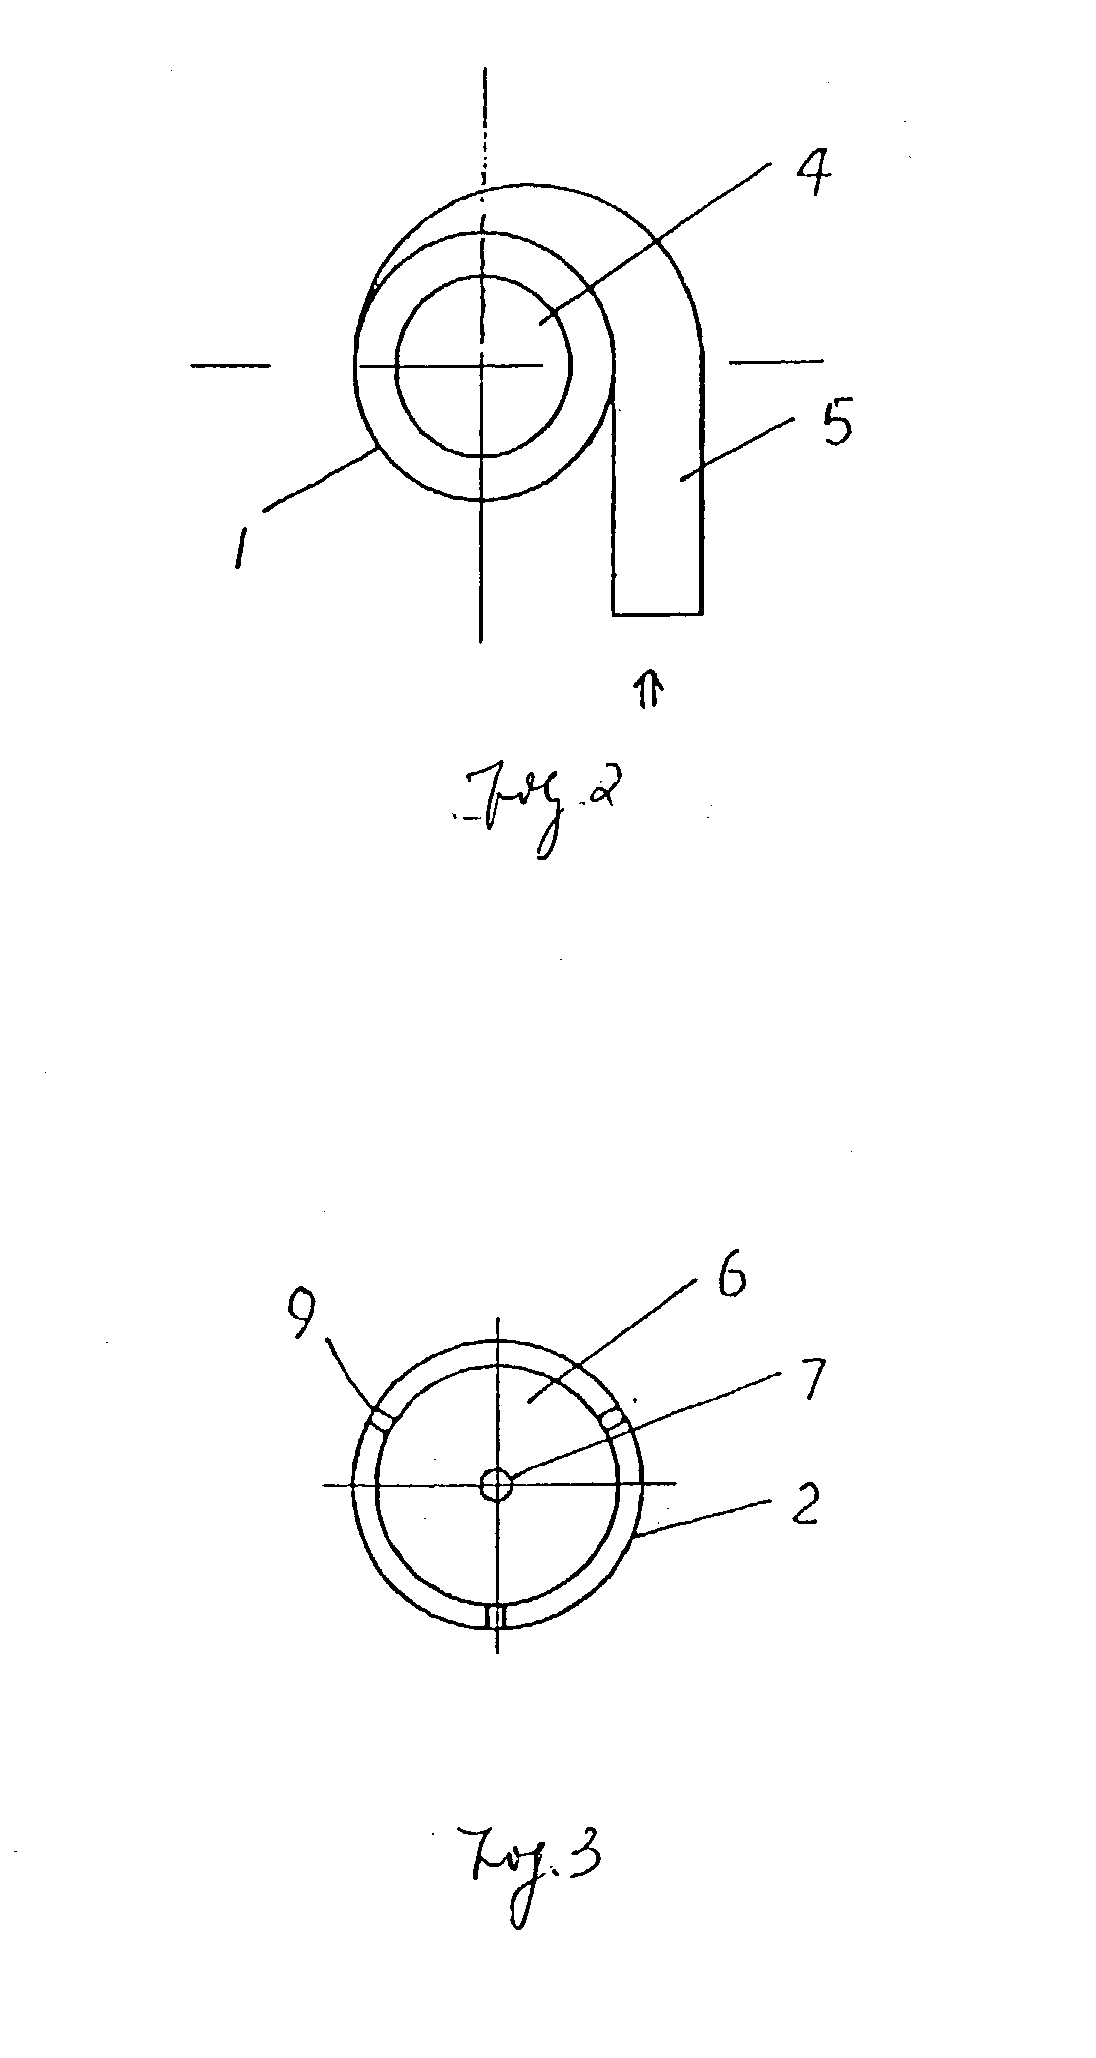 Decelerated centrifugal dust removing apparatus for dust cleaner